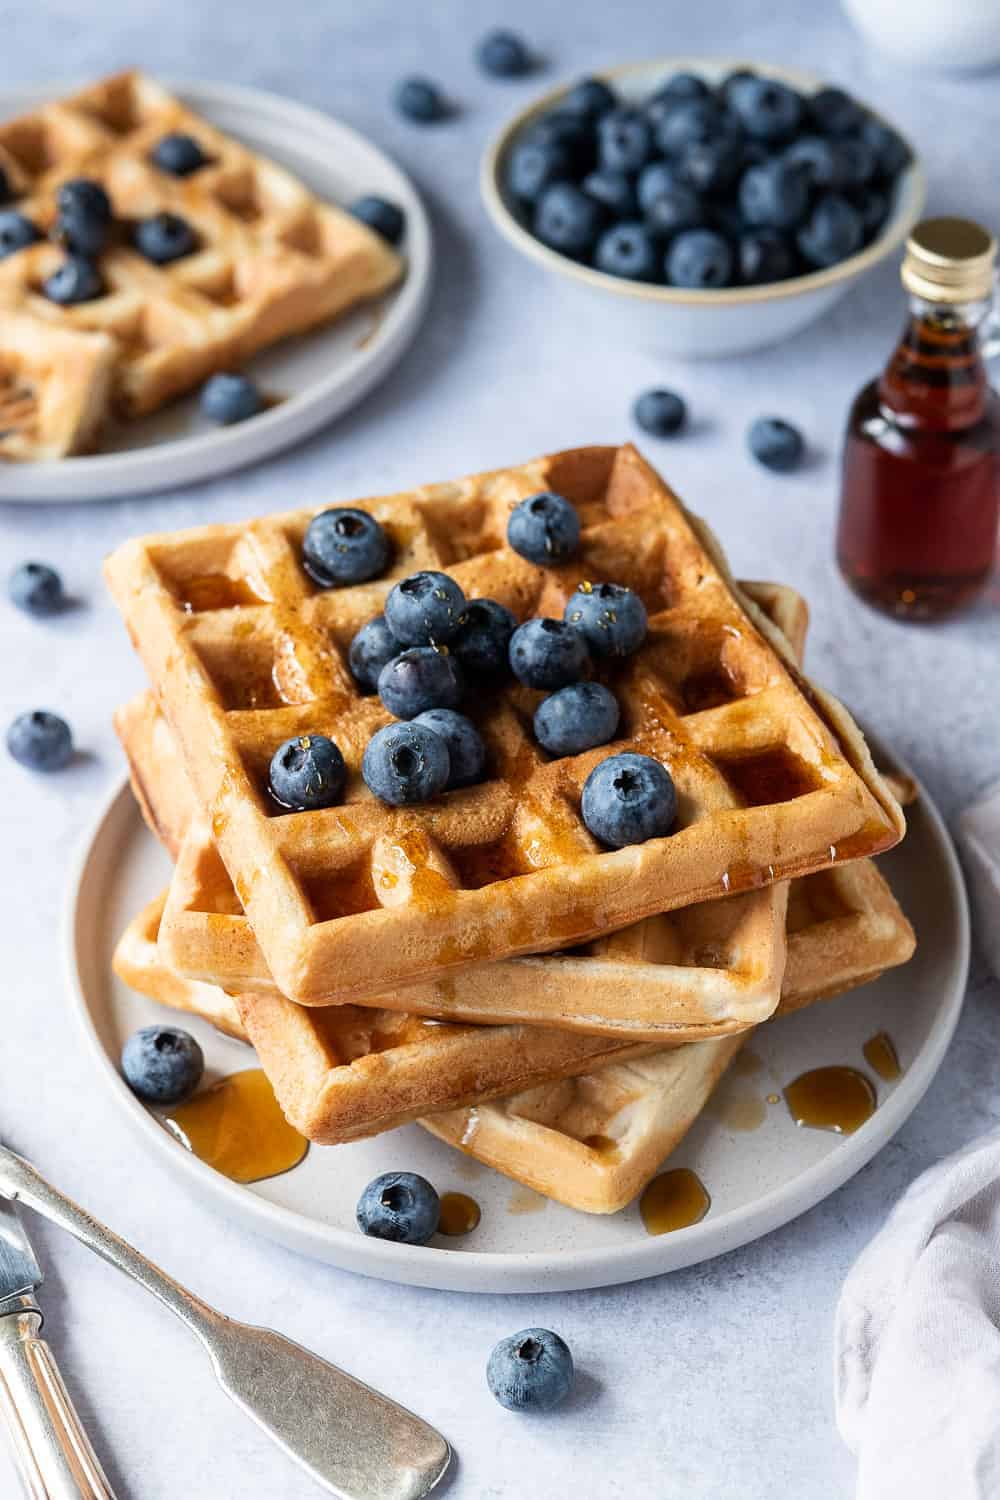 A stack of vegan waffles on a grey plate with blueberries and maple syrup.